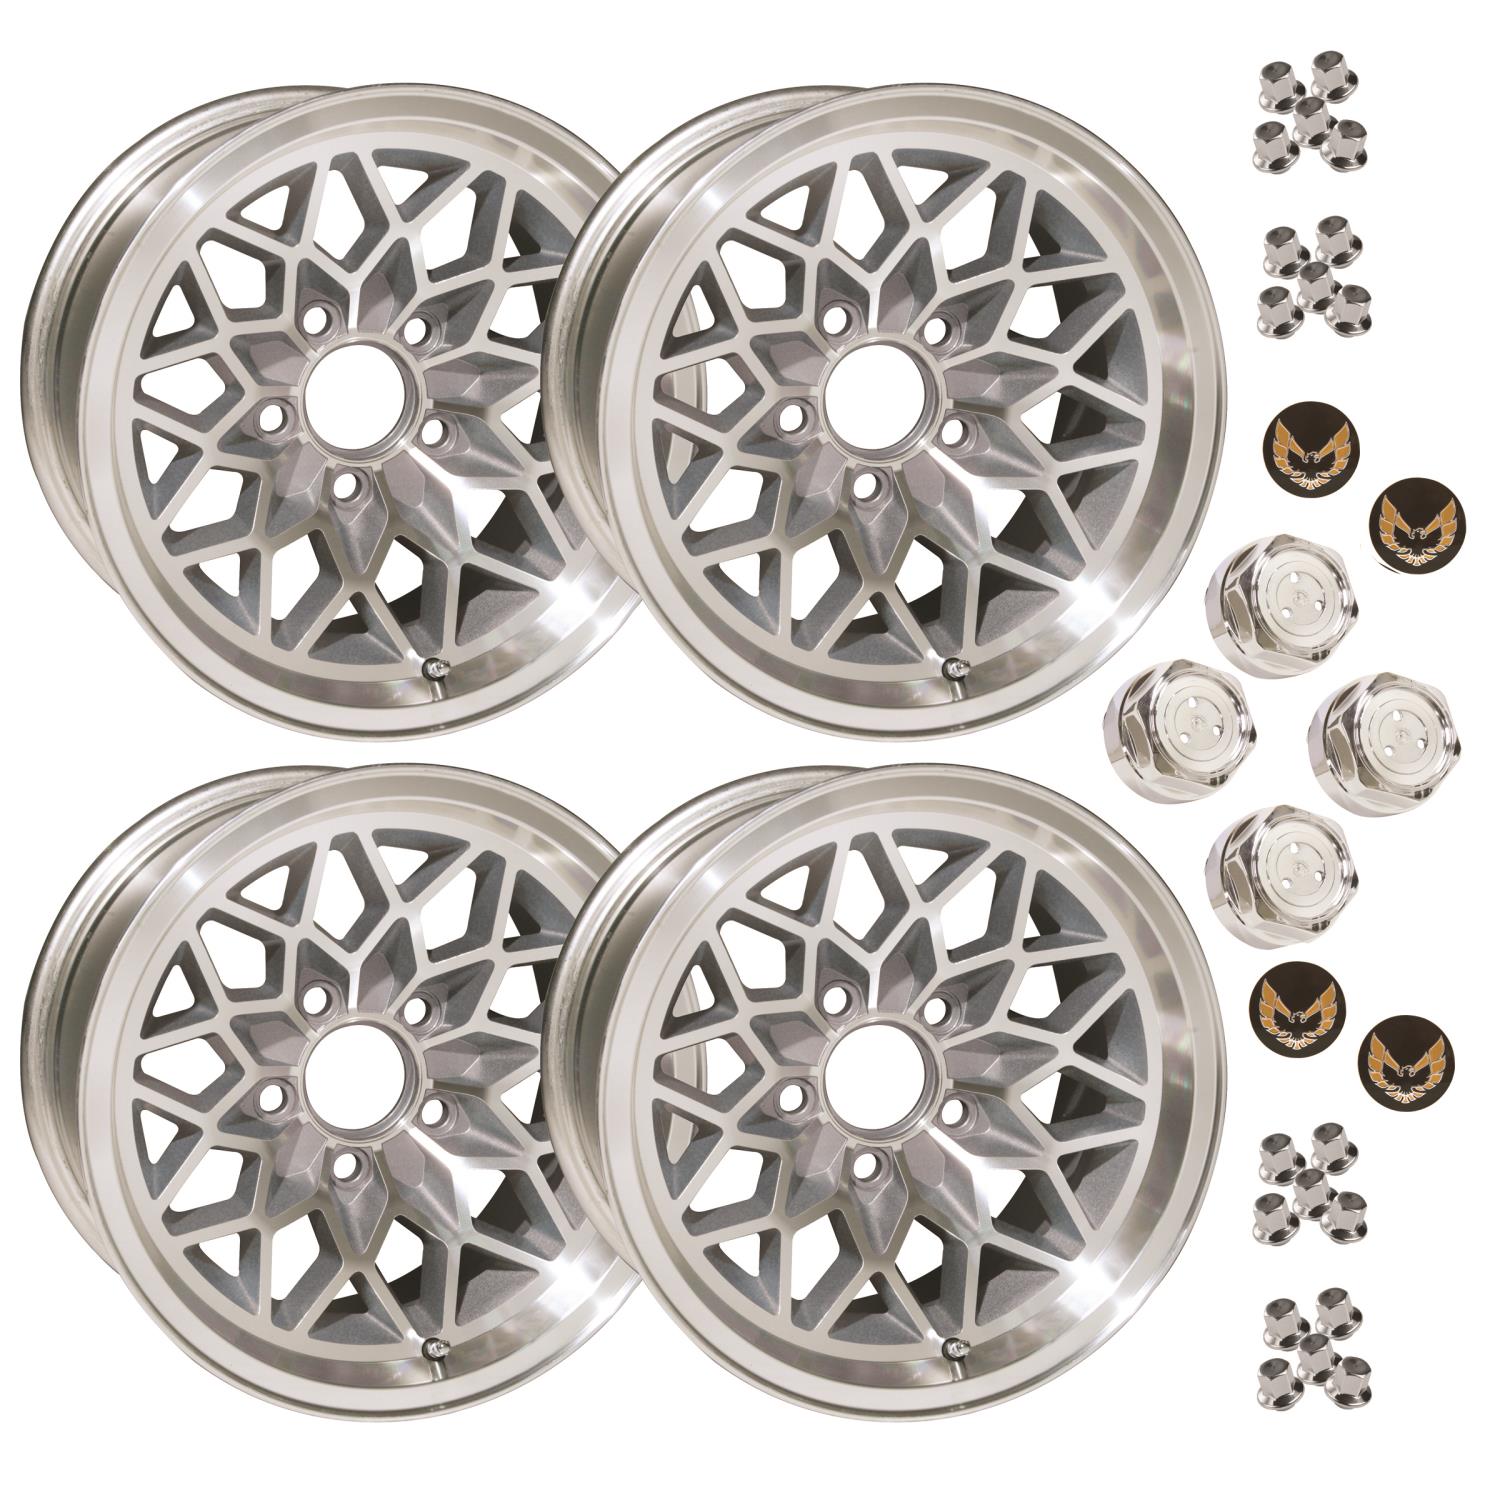 SSF179KG Snowflake Wheel Kit [Size: 17" x 9"] Finish: Silver Painted Recesses & Gloss Clear Coat